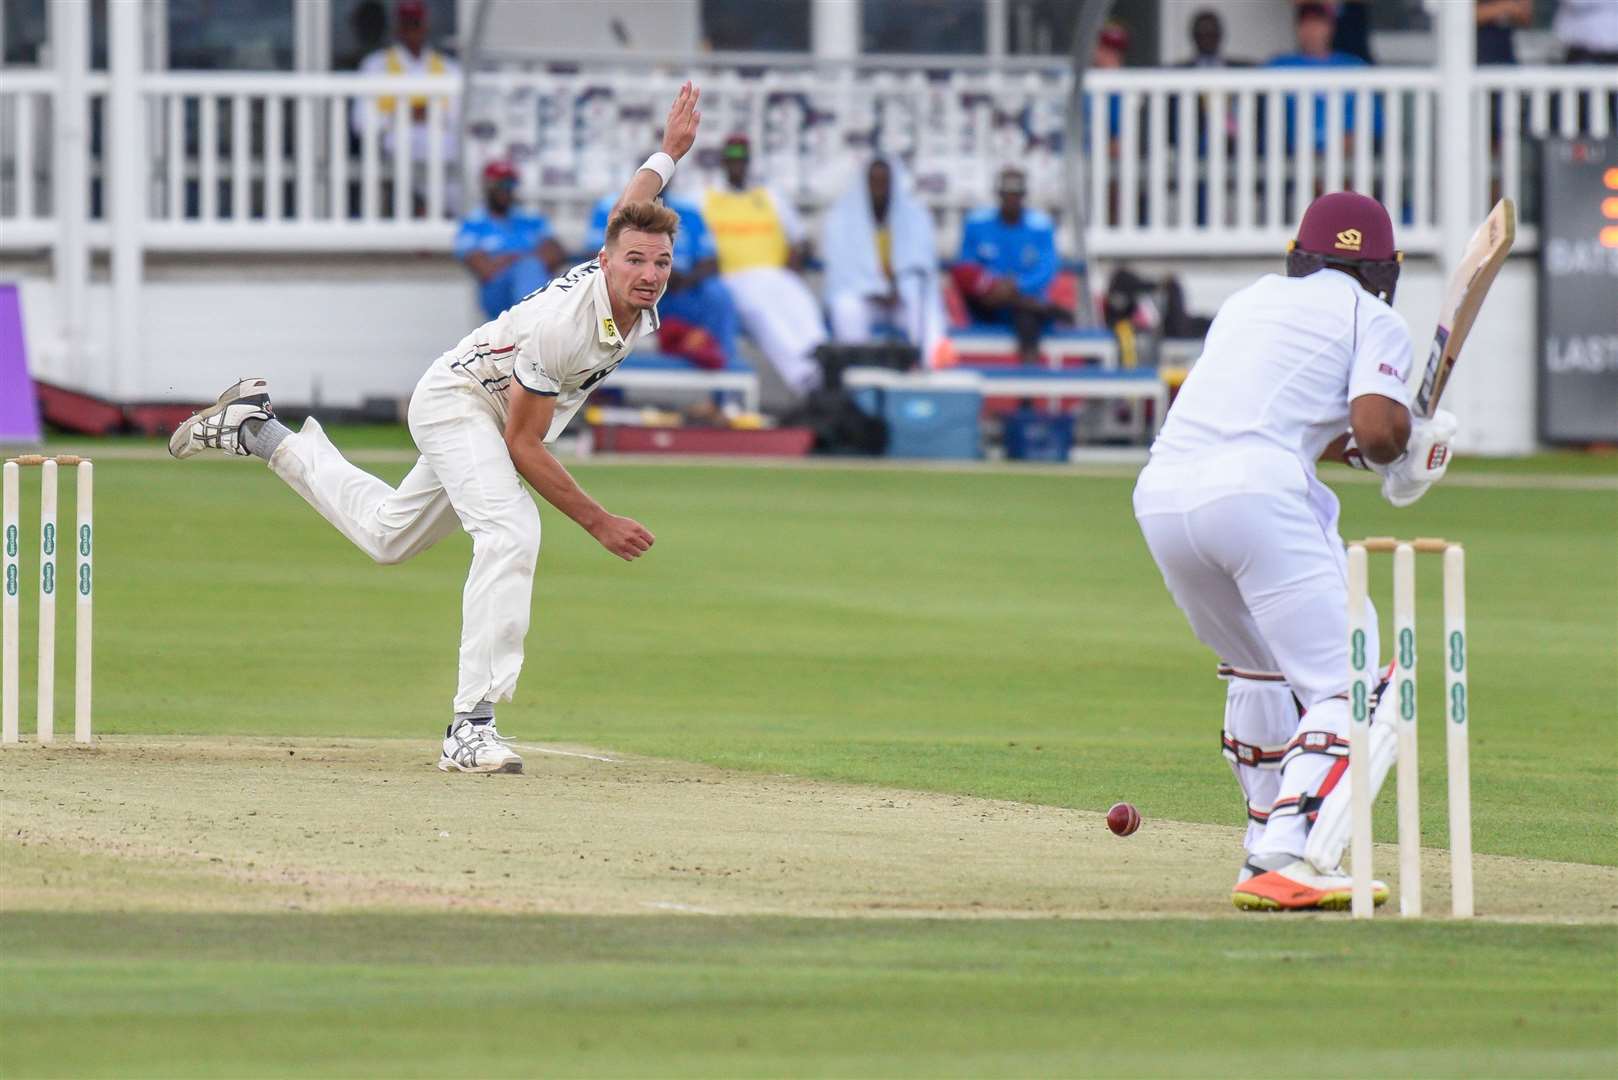 Charlie Hartley bowls to Shai Hope as Kent host West Indies in three-day fixture in 2017 Picture: Alan Langley